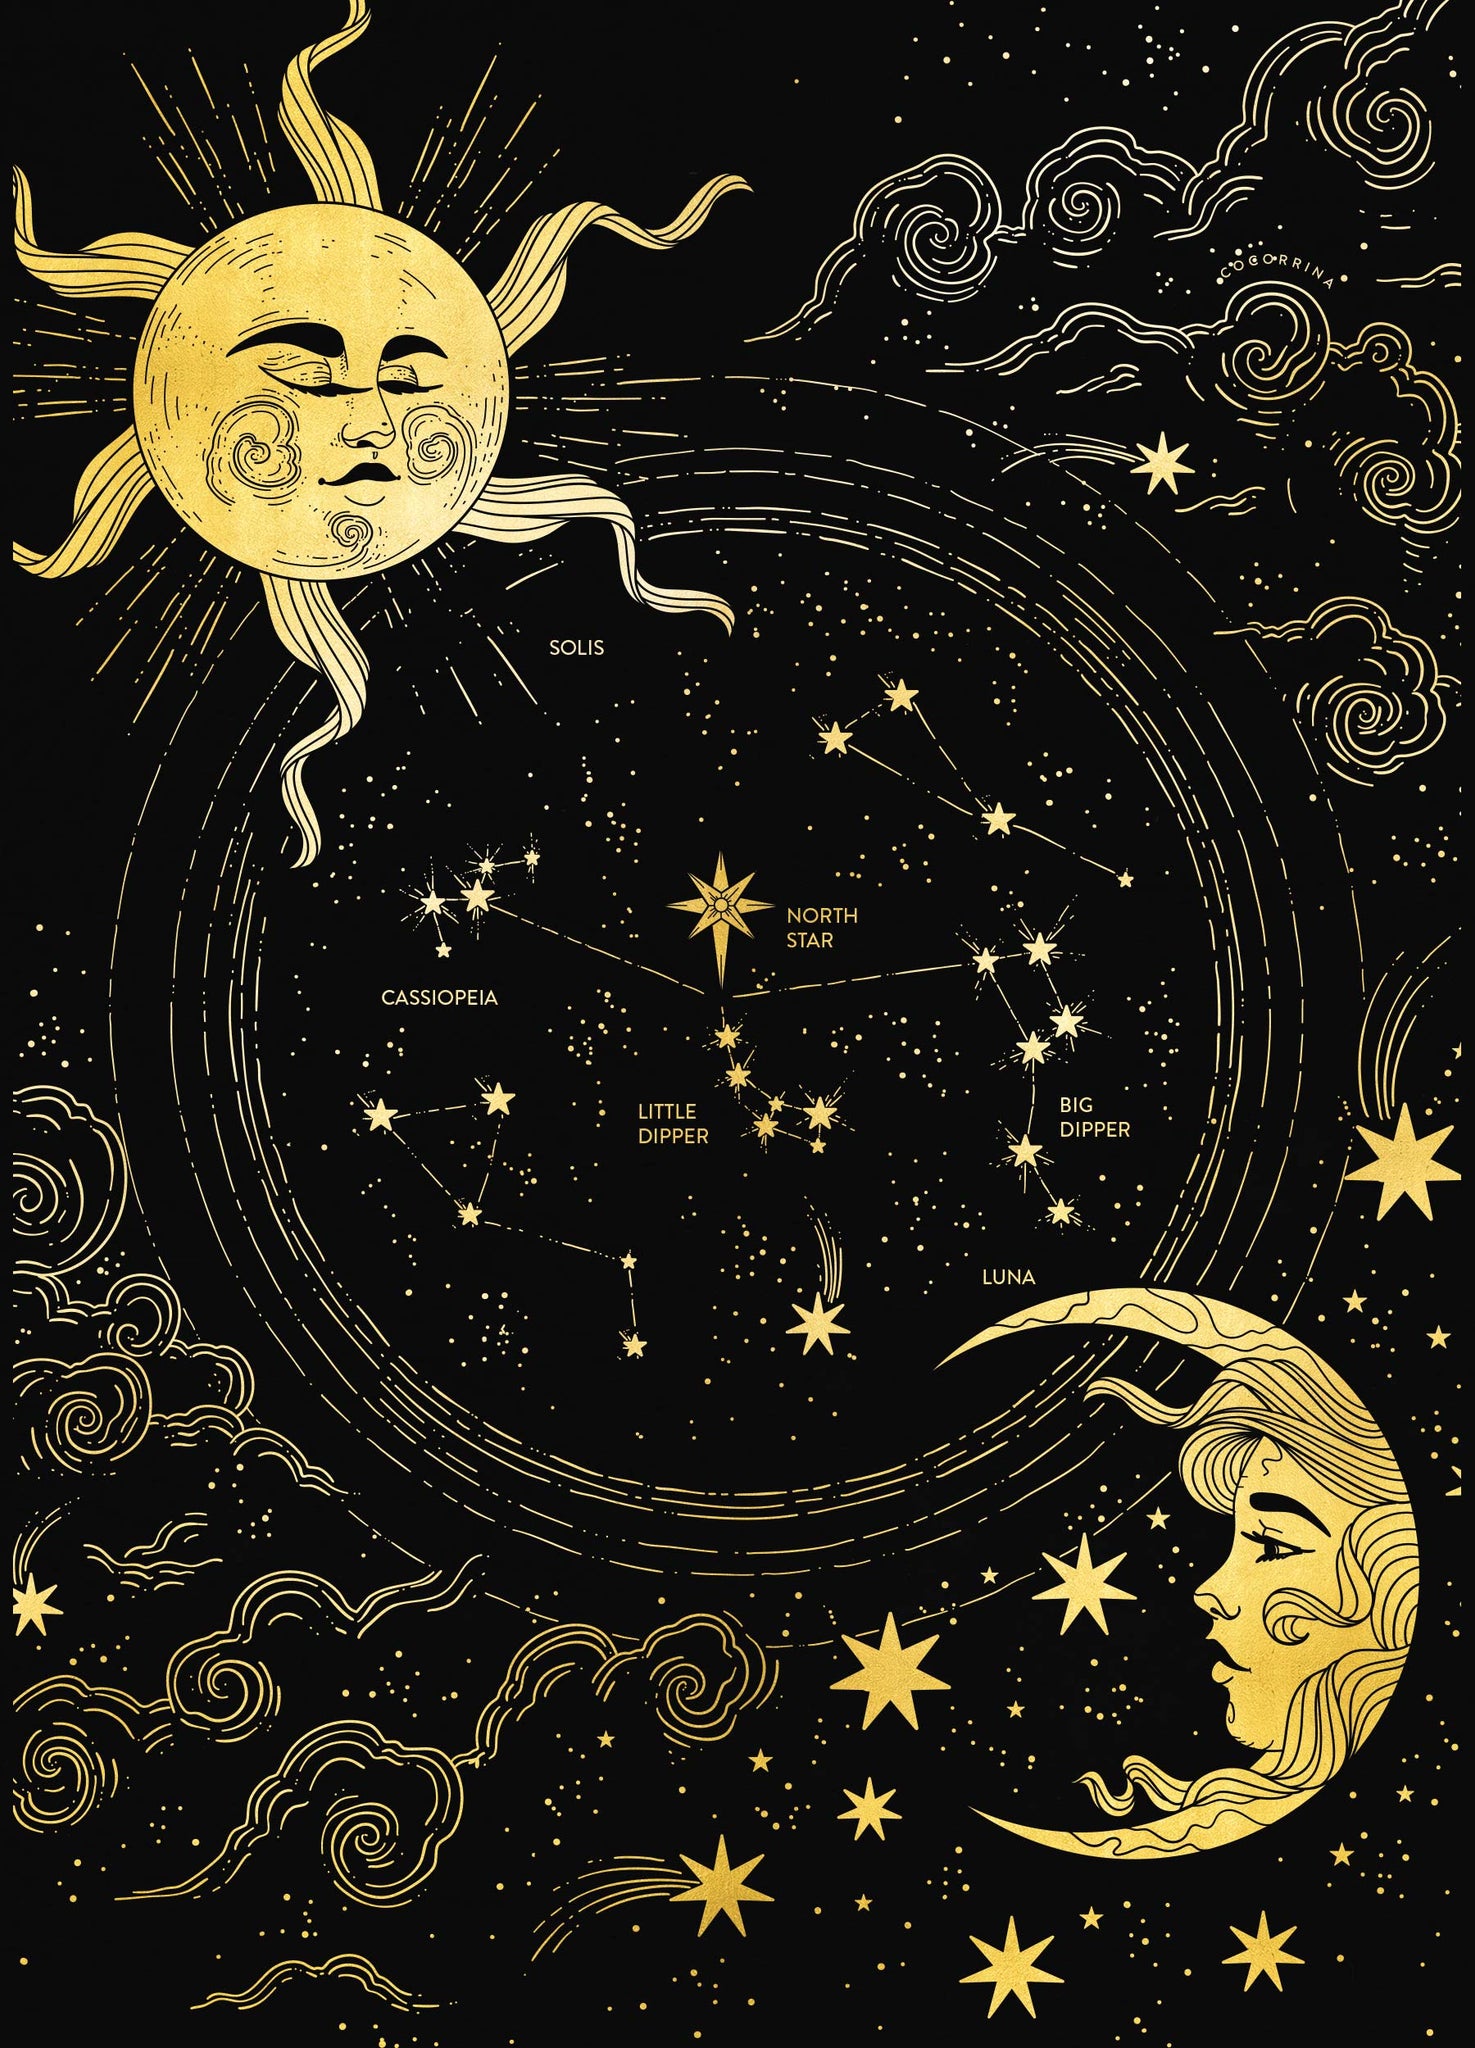 The North Star sky map gold foil art print on black paper by Cocorrina & Co